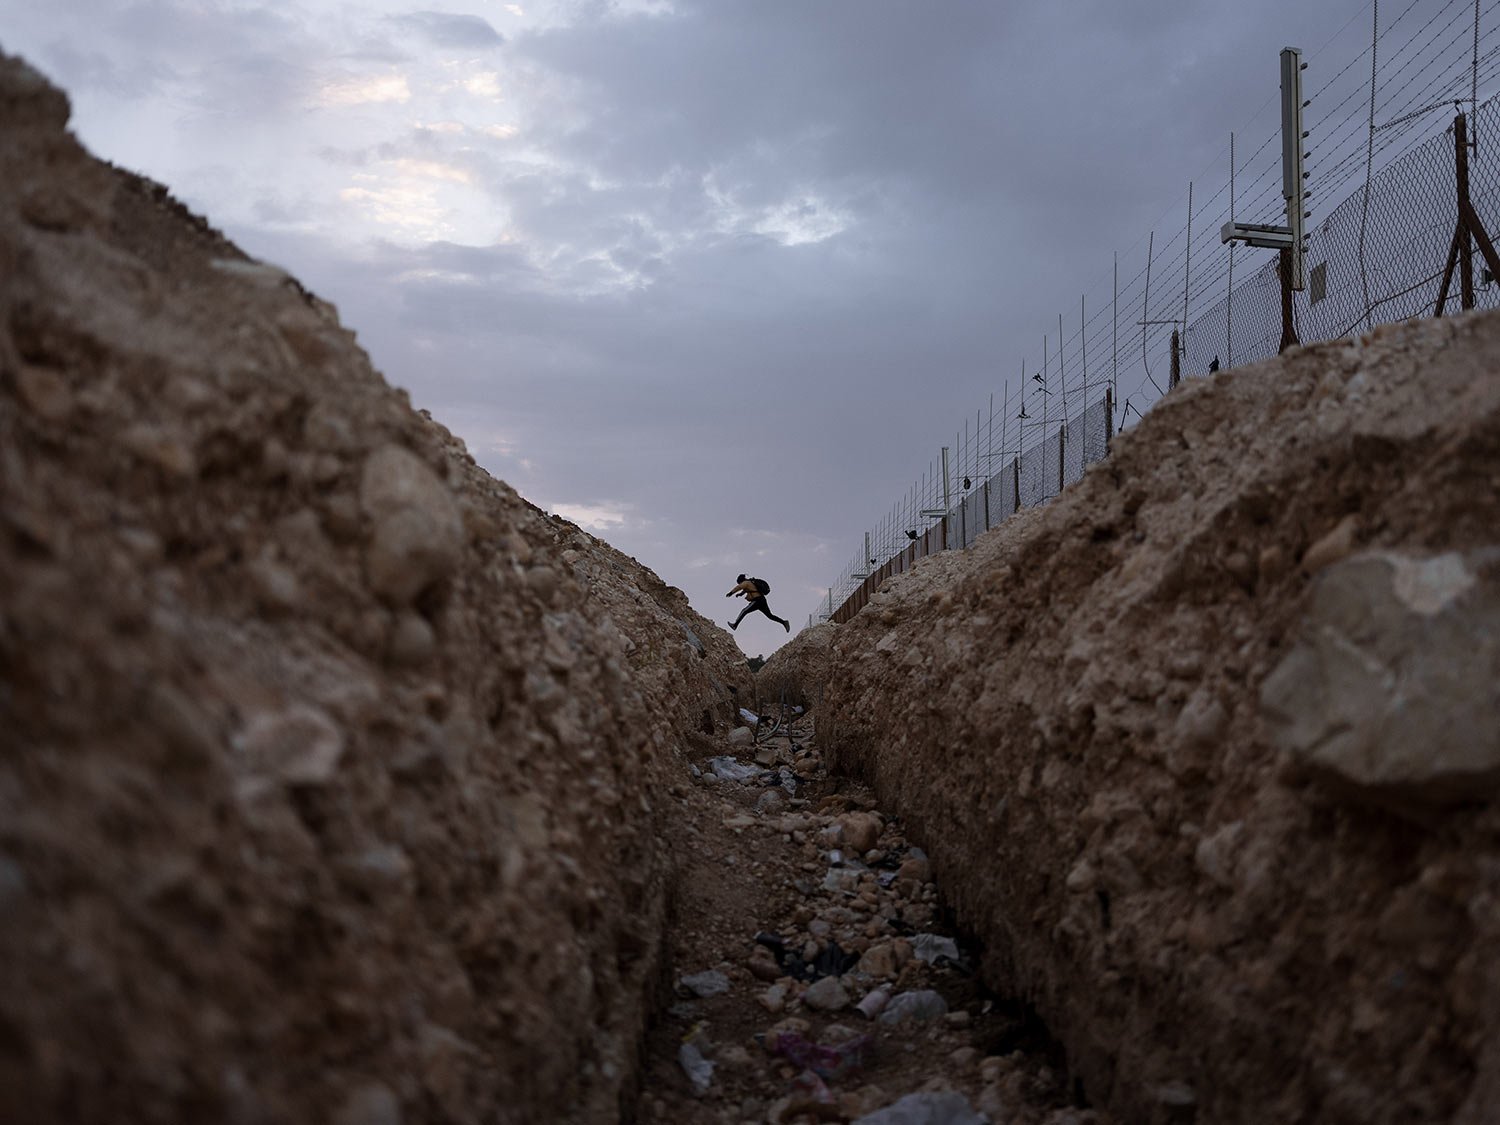  A Palestinian crosses into Israel from the West Bank through an opening in the Israeli separation barrier near Meitar crossing south of West Bank, March 6, 2022. (AP Photo/Oded Balilty) 